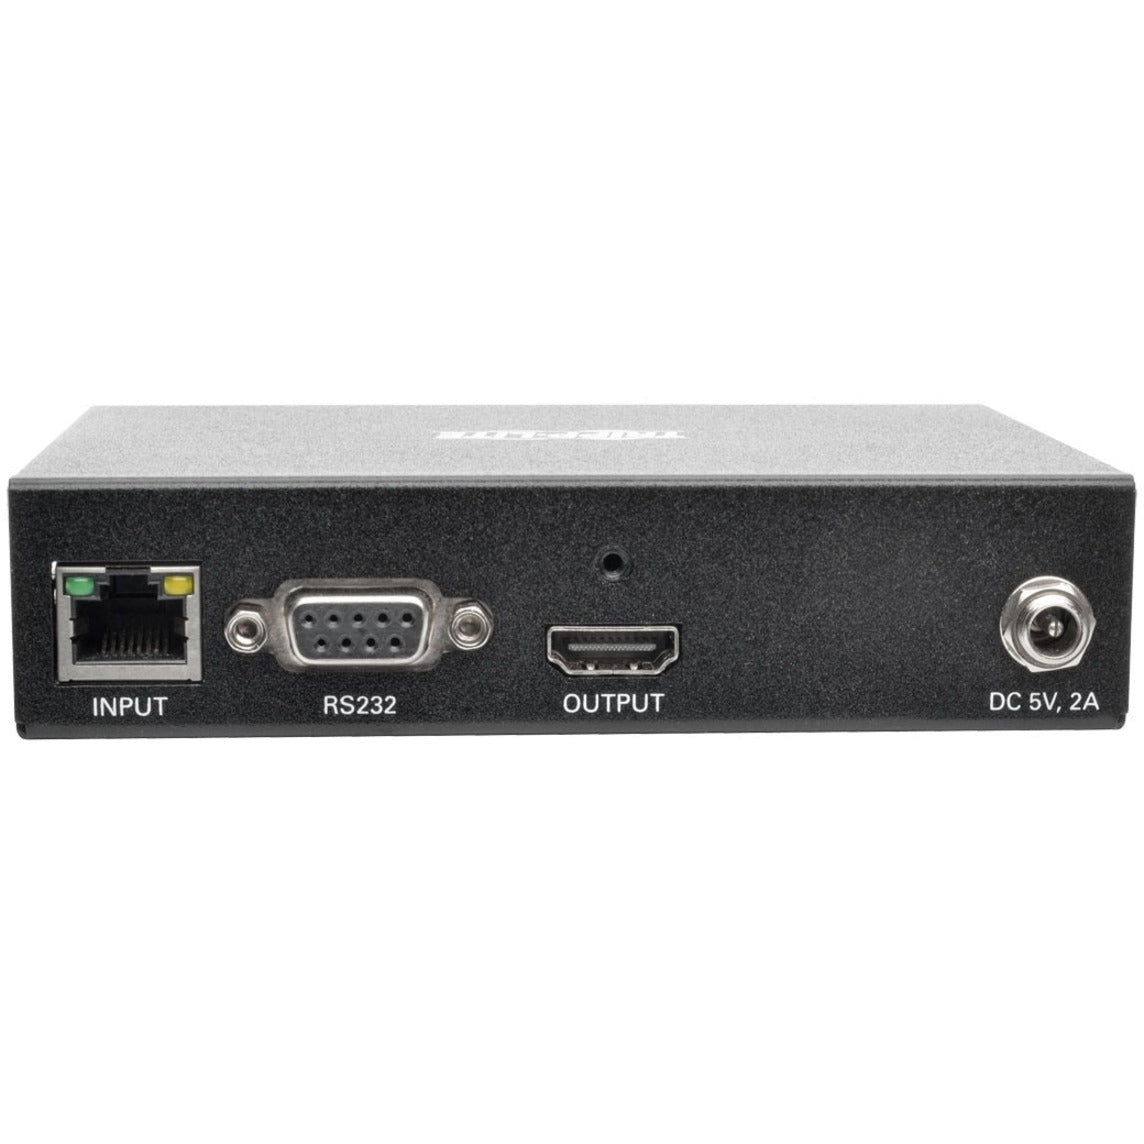 Tripp Lite B160-100-HDSI Video Extender Receiver, HDMI Audio/Video with RS-232 Serial